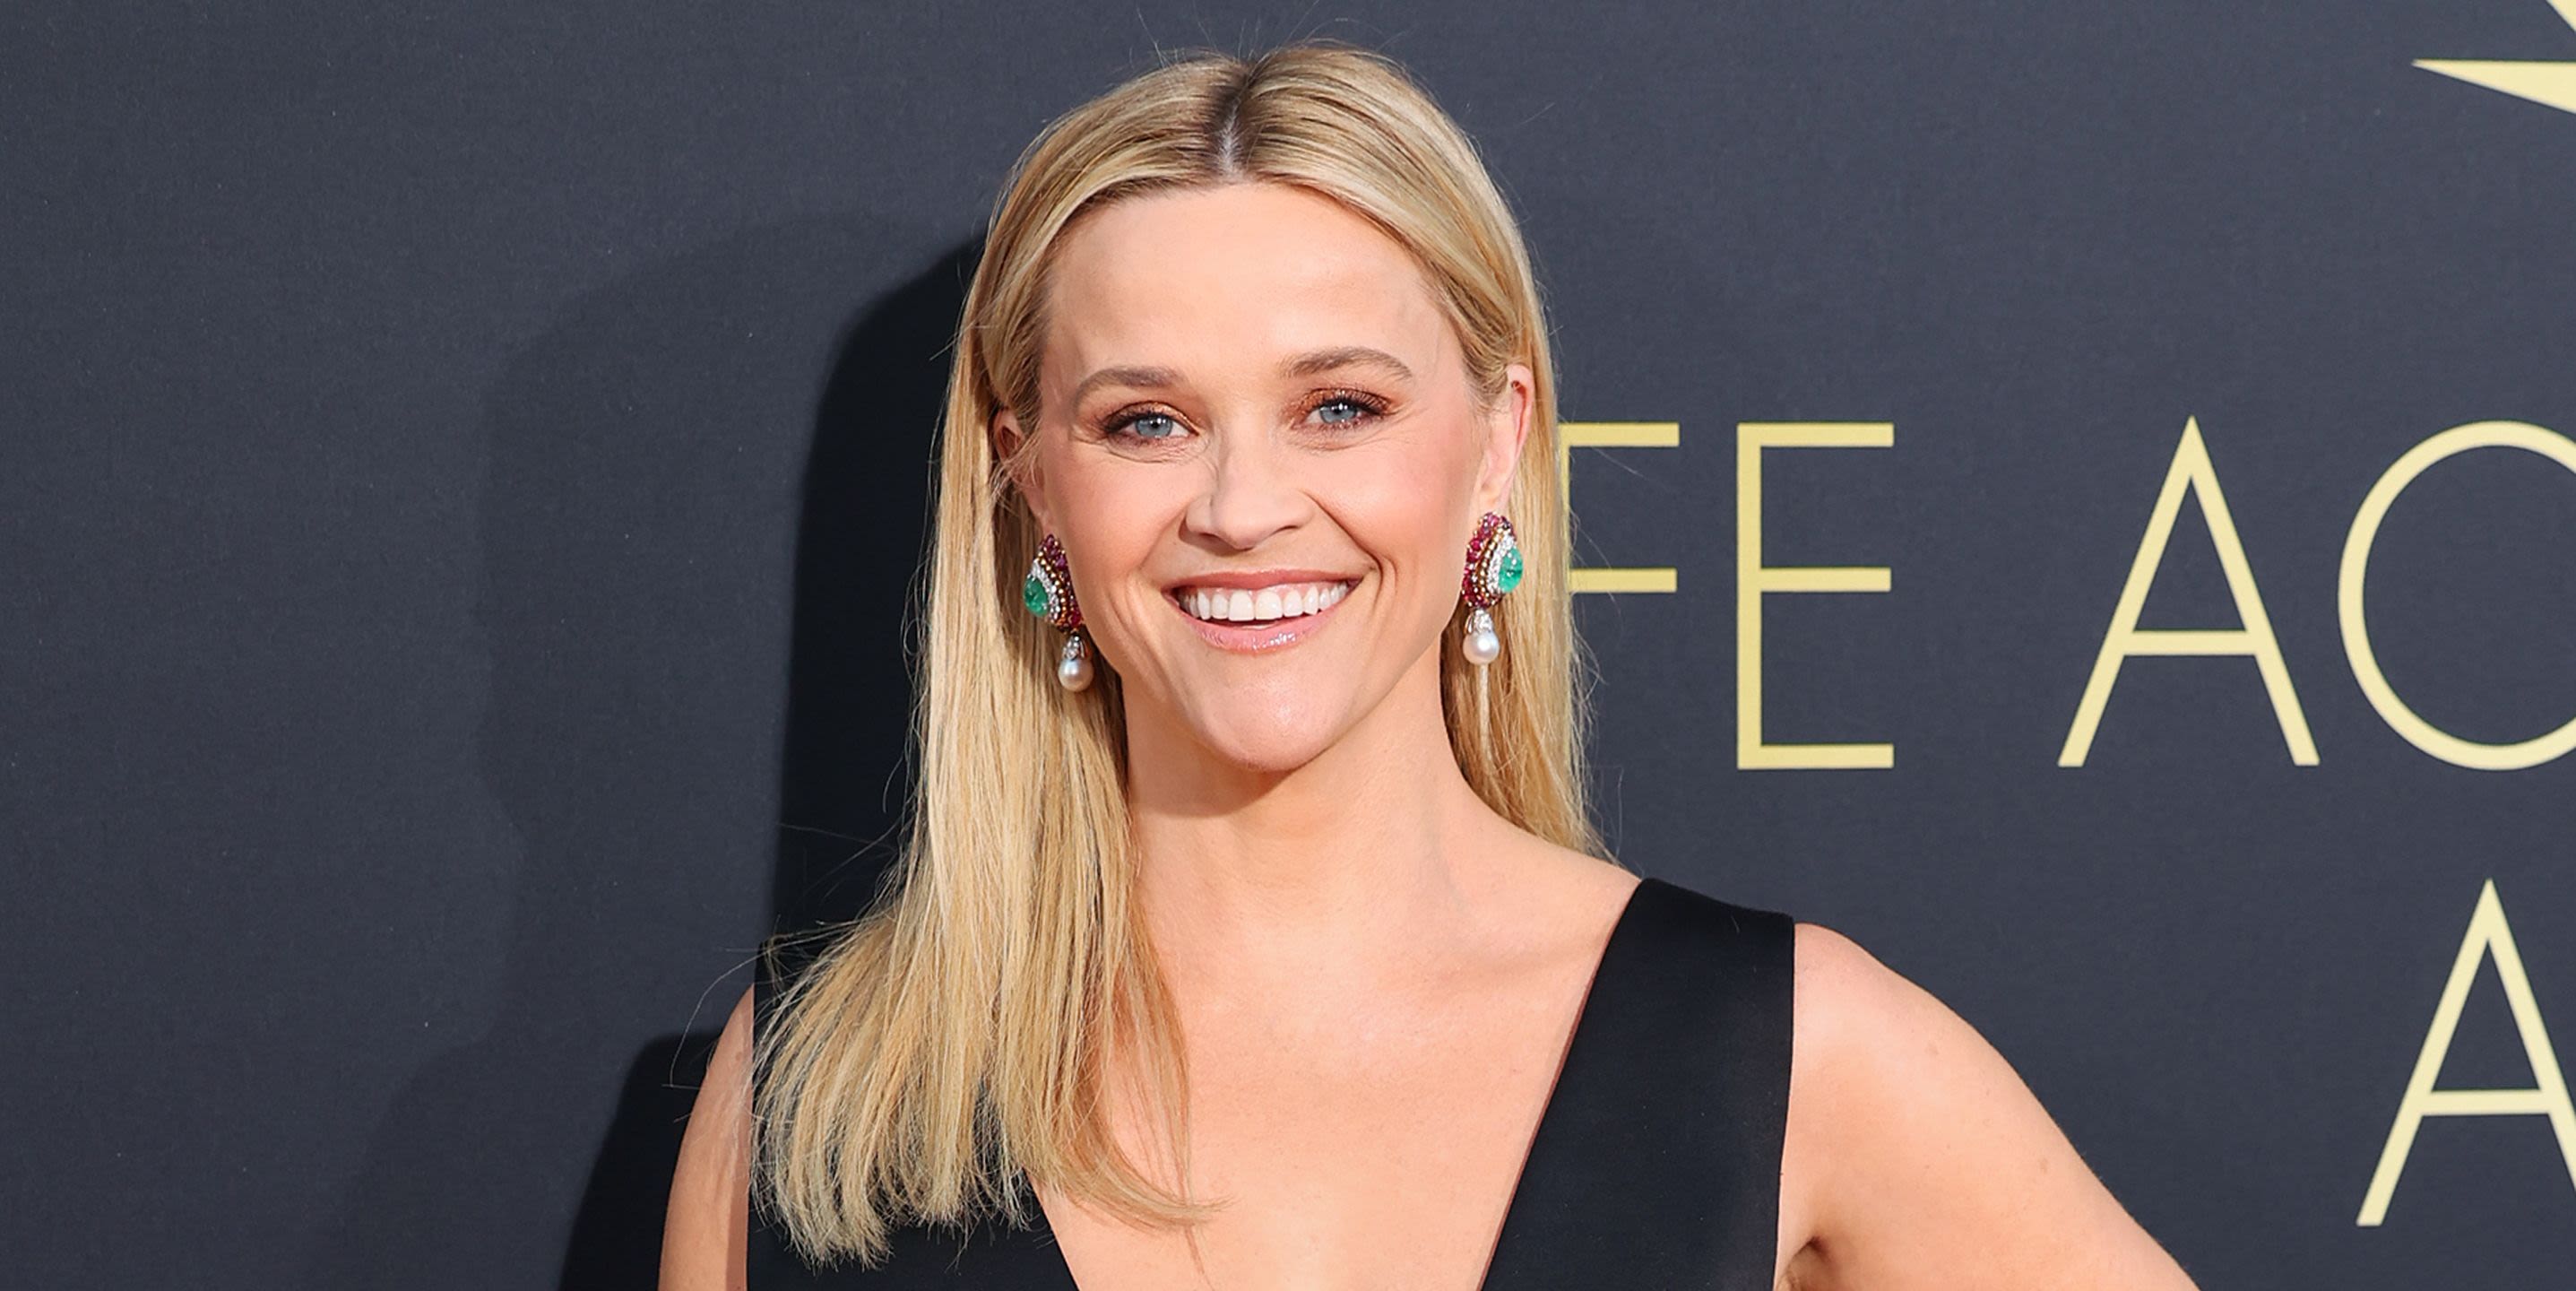 Reese Witherspoon stuns fans by revealing her real name